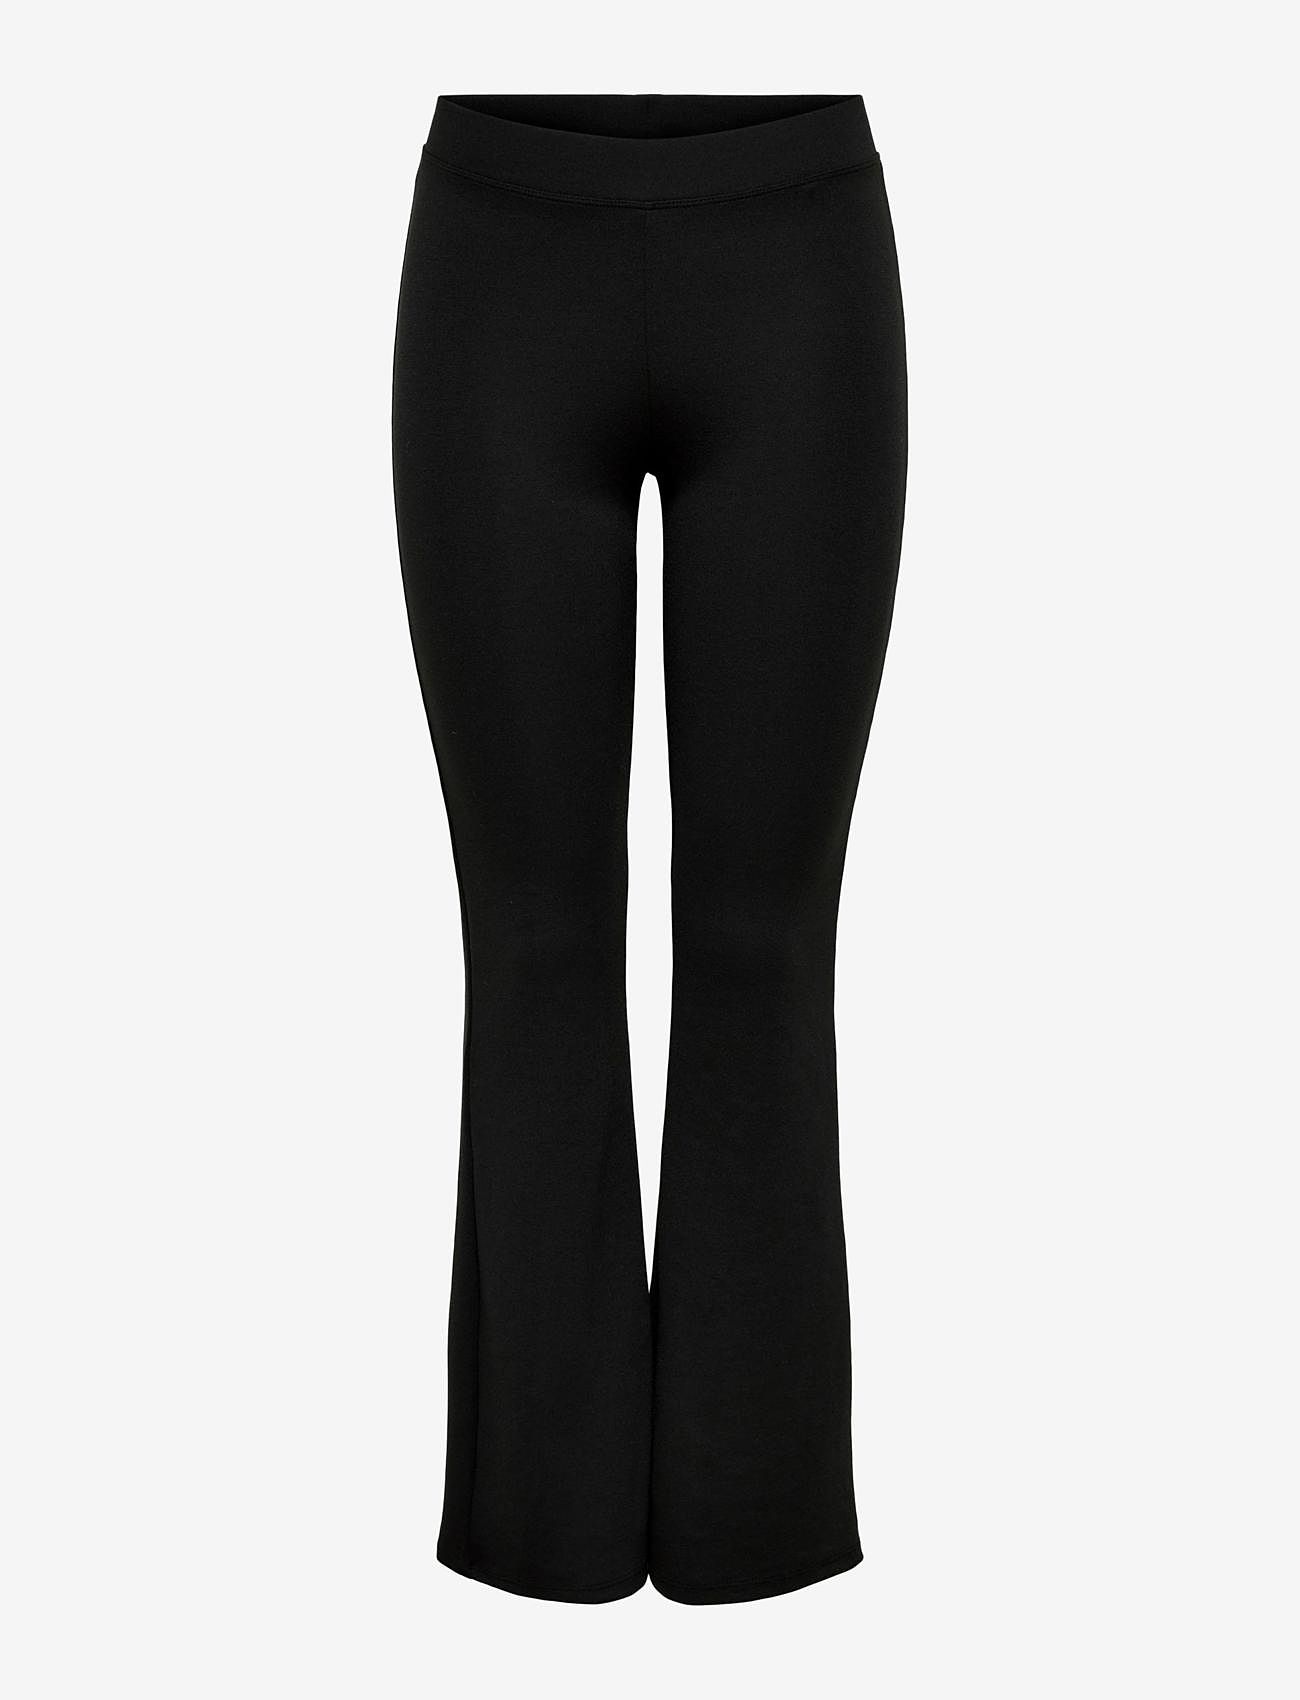 ONLY - ONLFEVER STRETCH FLAIRED PANTS JRS NOOS - madalaimad hinnad - black - 0